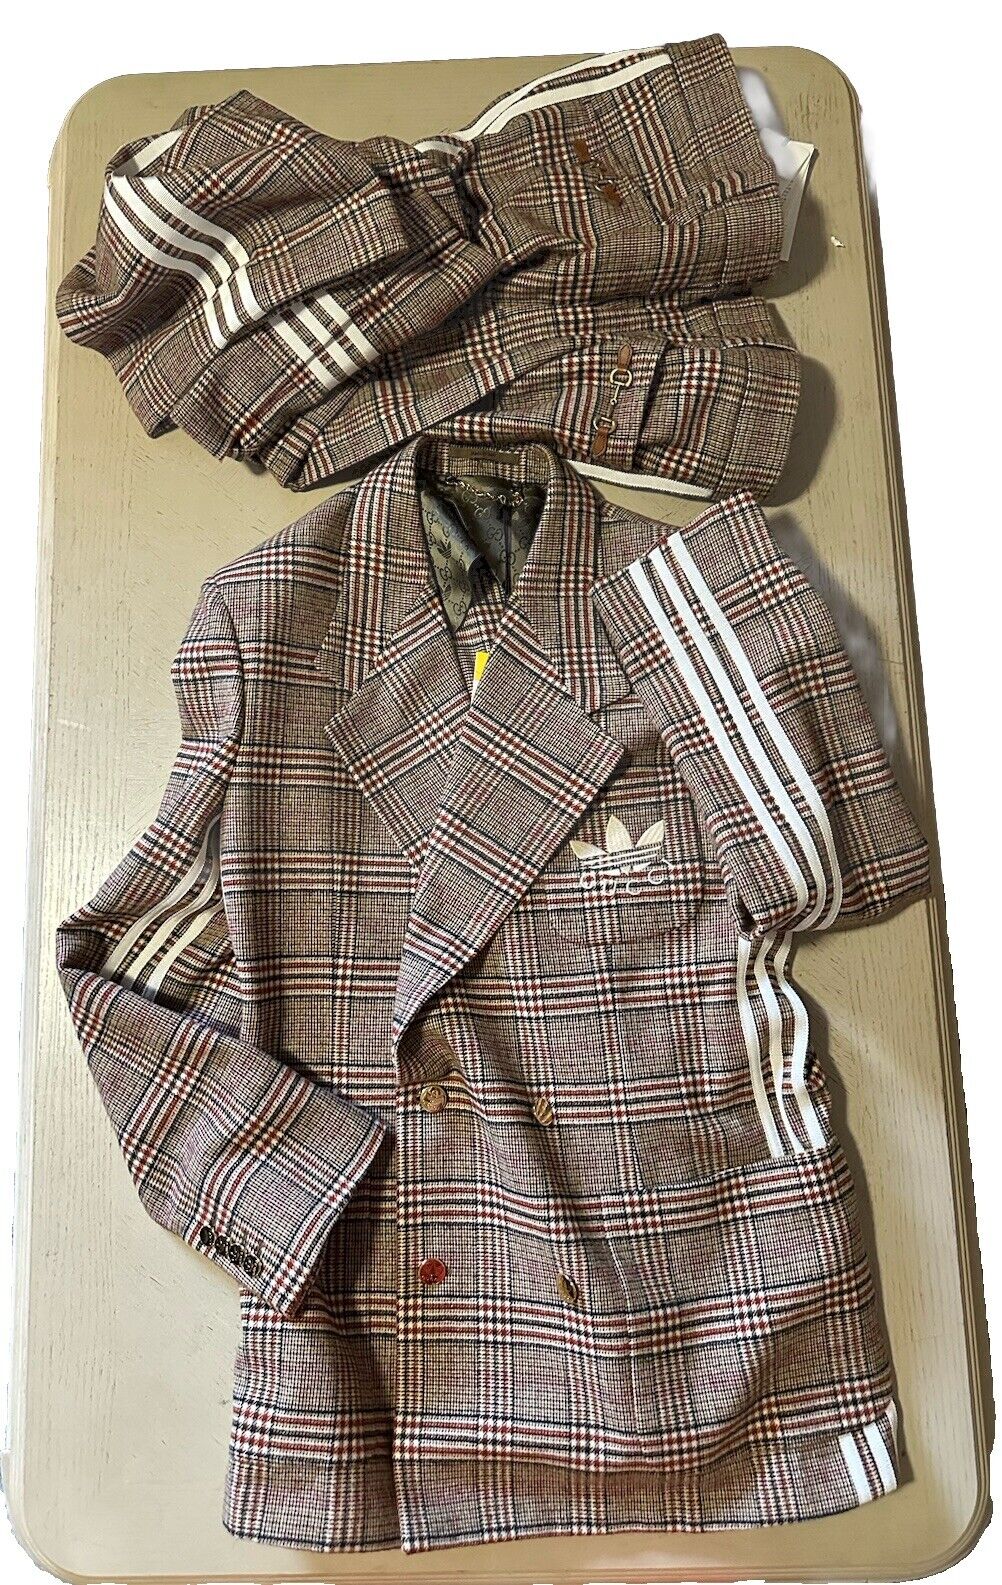 Gucci adidas Men Check On Flannel Suit Beige/Brown 40R US/50R Eu New $5800